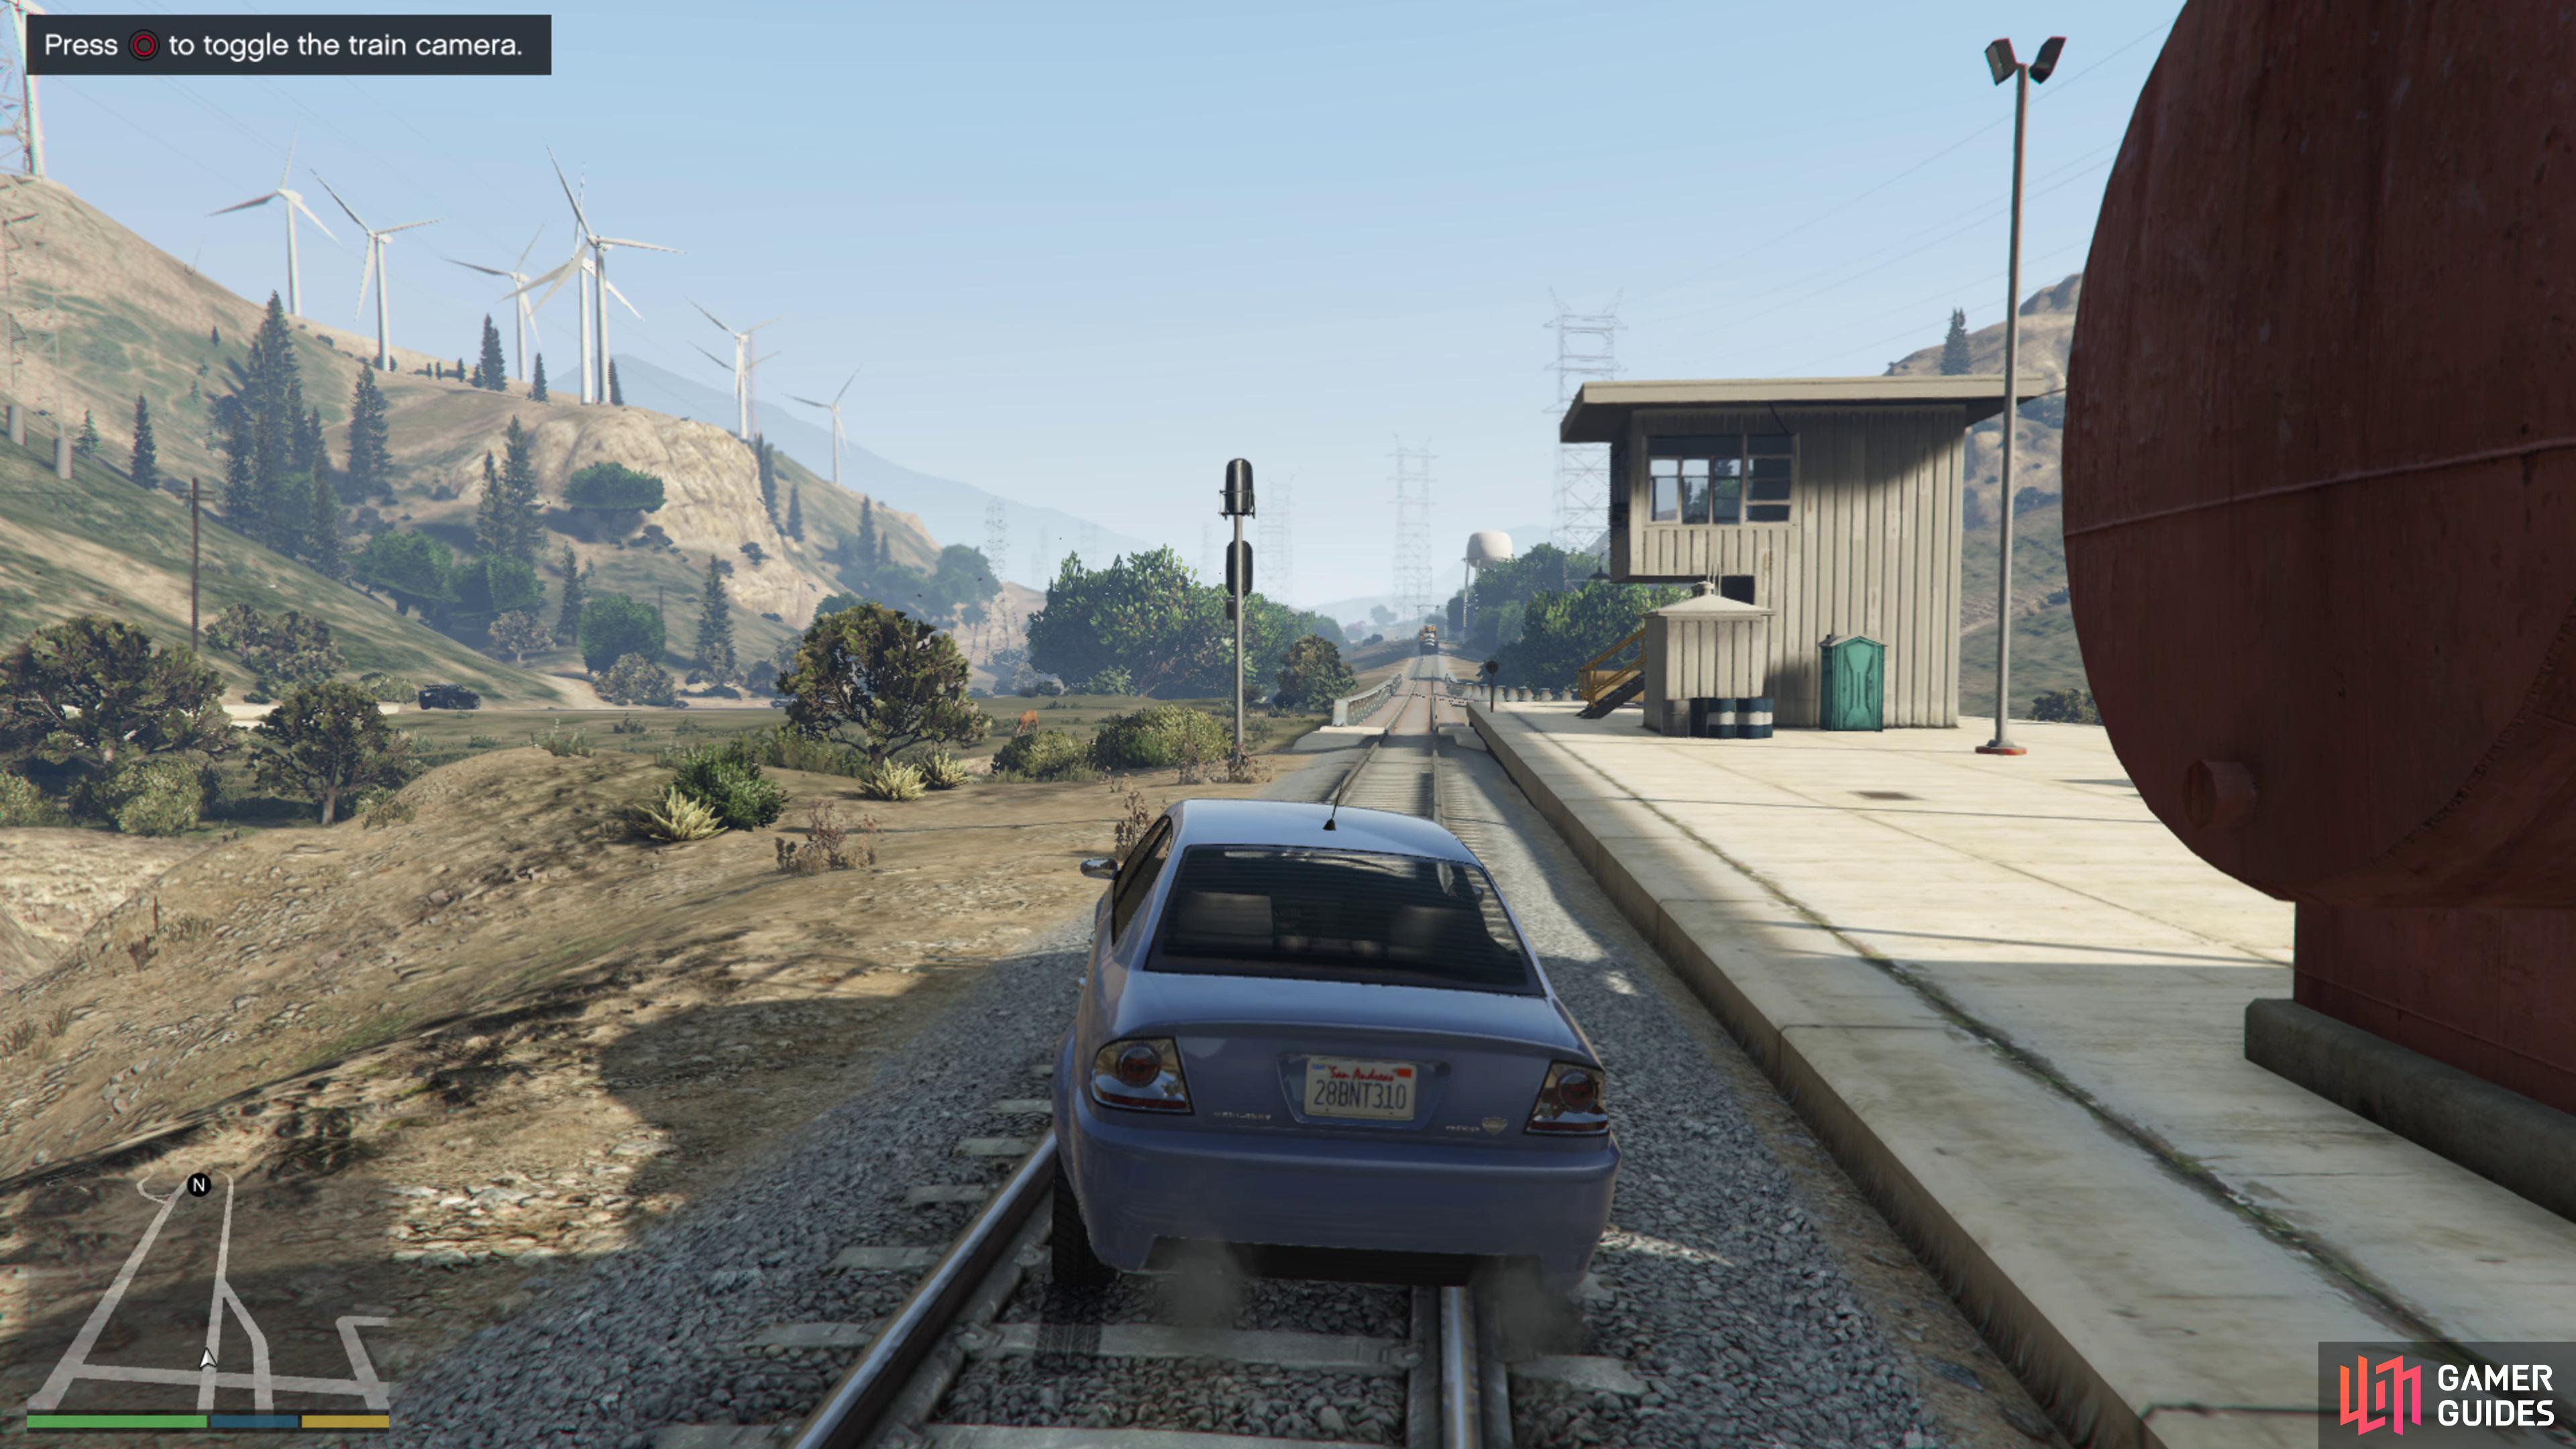 Park the car on the tracks and wait for the train to approach